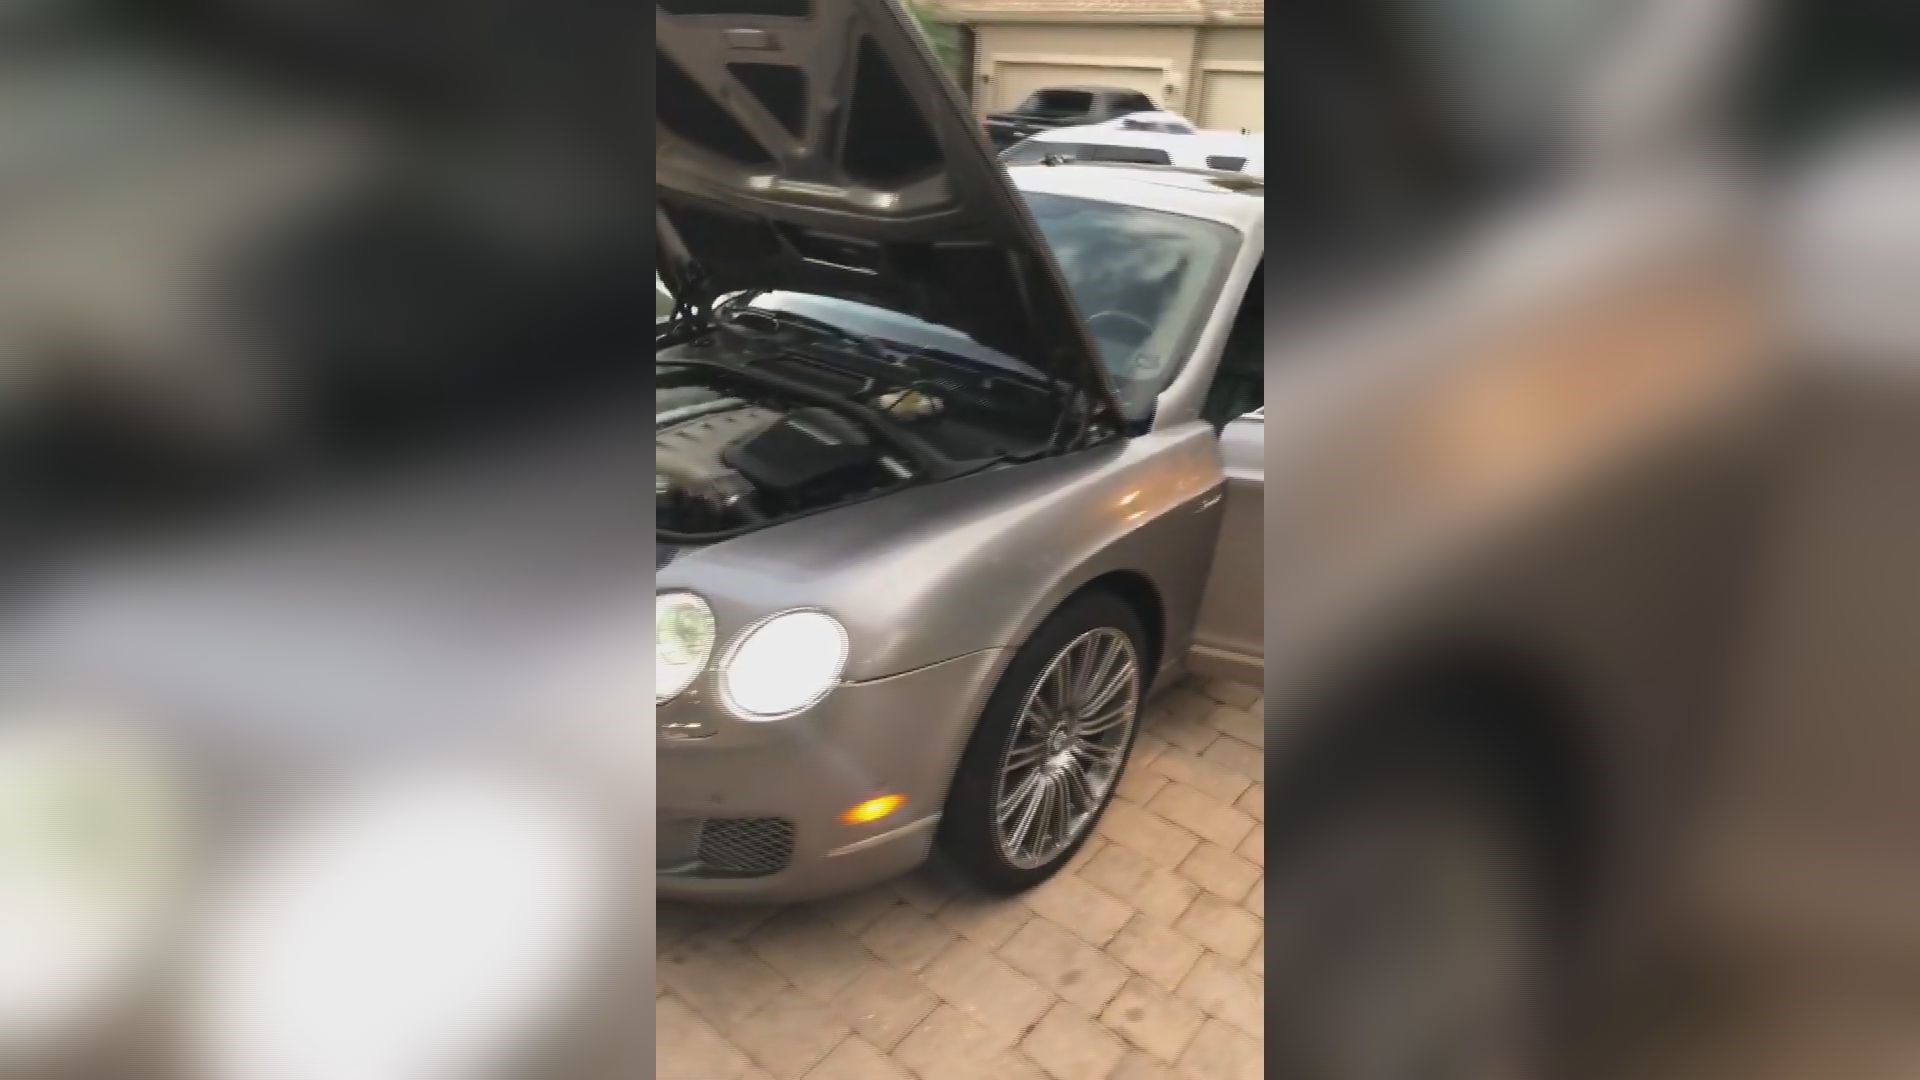 Christopher Duluk's Bentley had it all, deputies say: lights, siren and a yellow state of Florida license plate attached to the back.